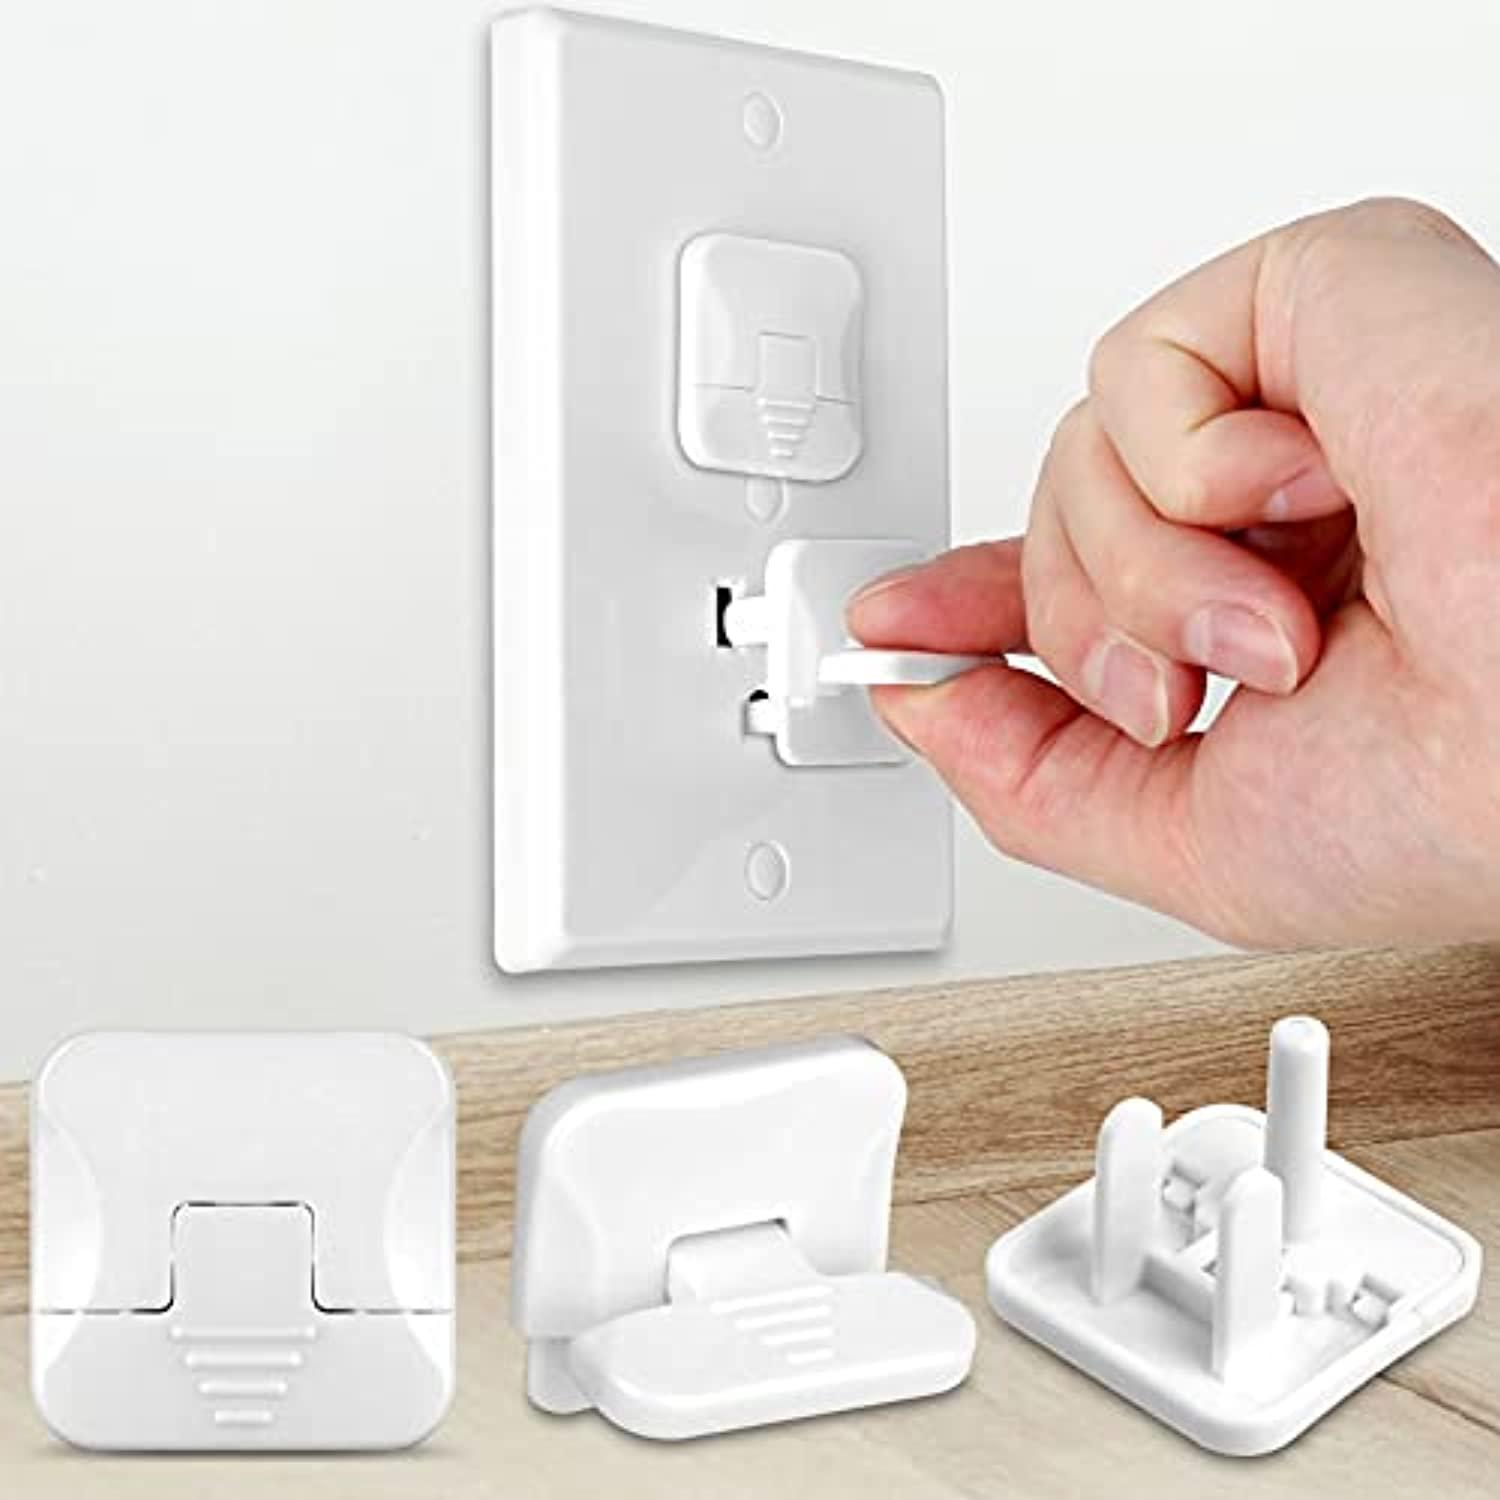 How to baby proof electrical outlets 